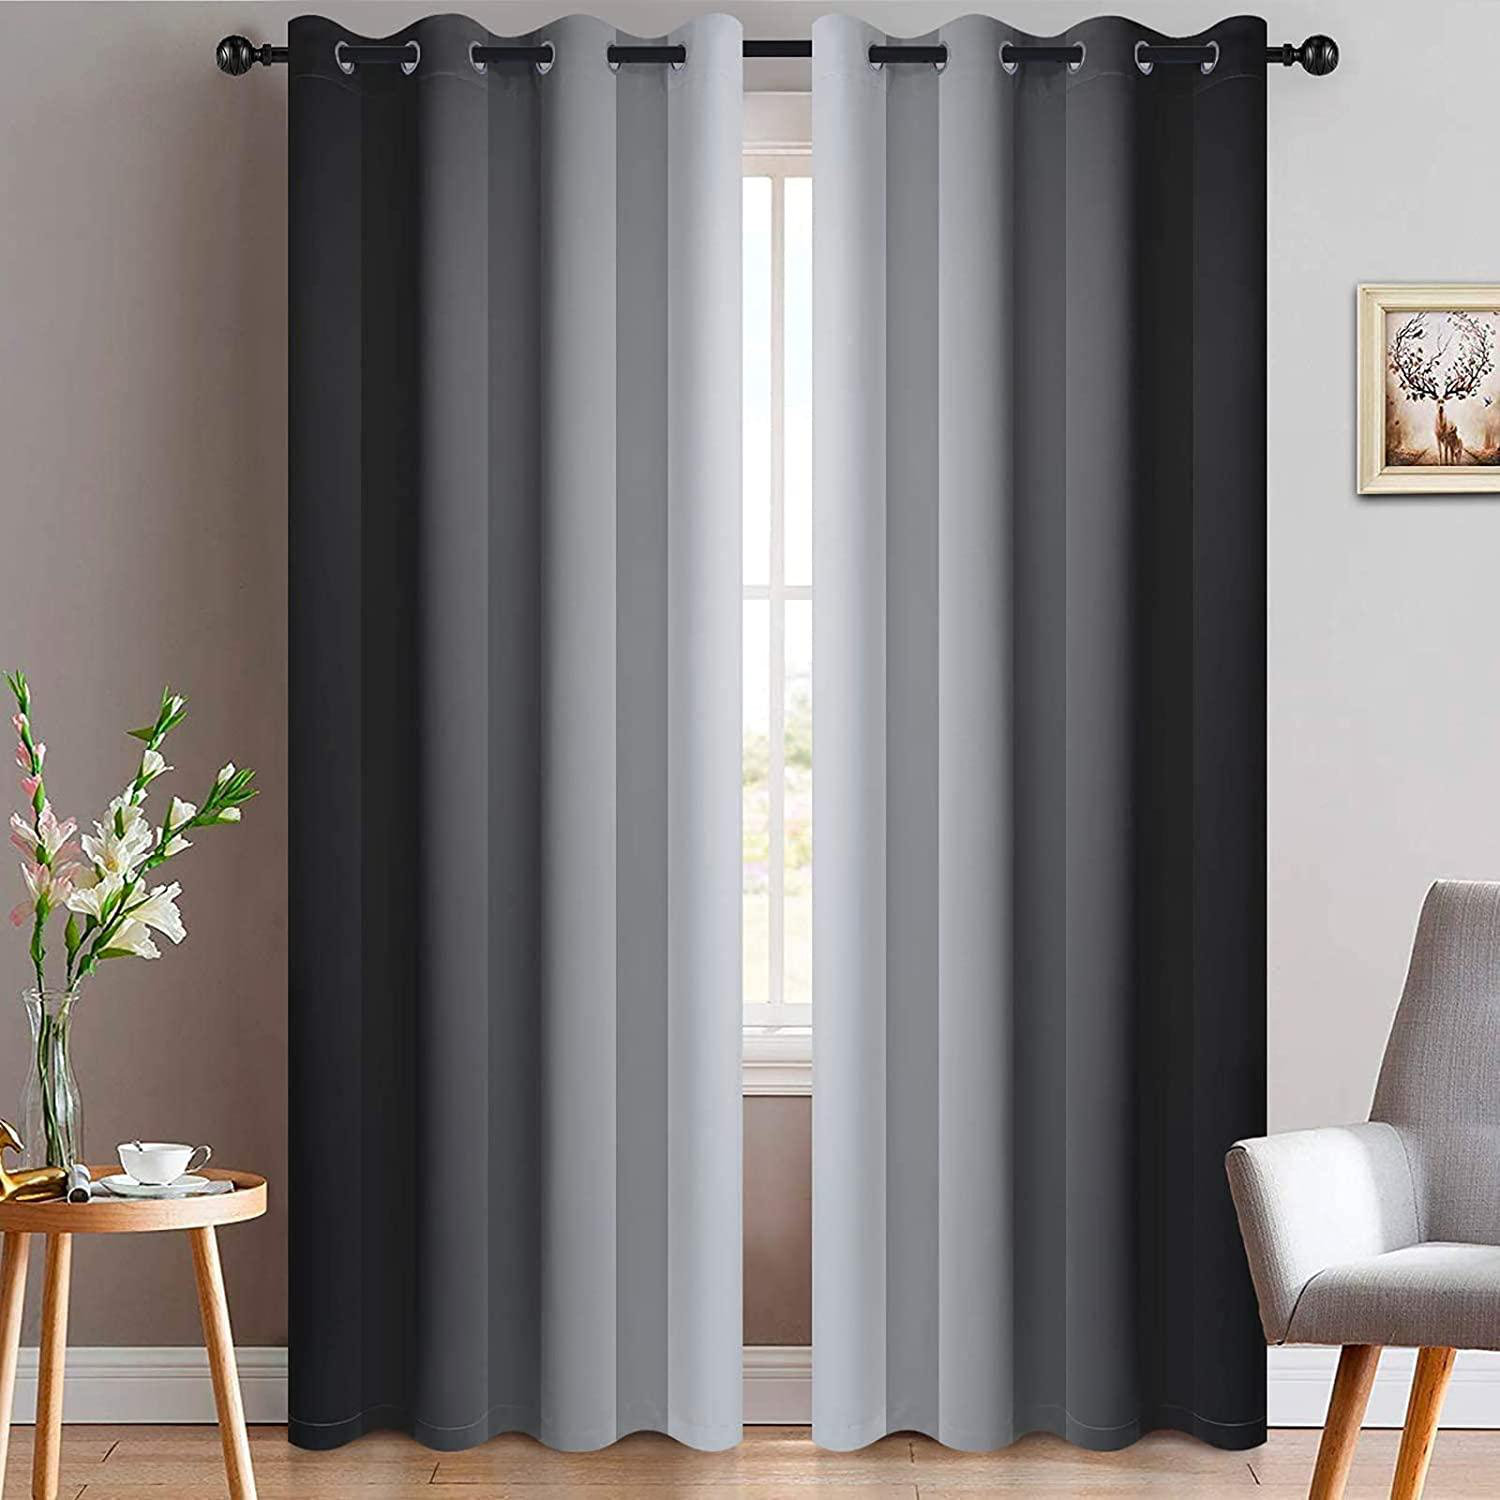 Blackout Curtains Thermal Insulated Grommet Long Curtain For Bedroom Living Room 